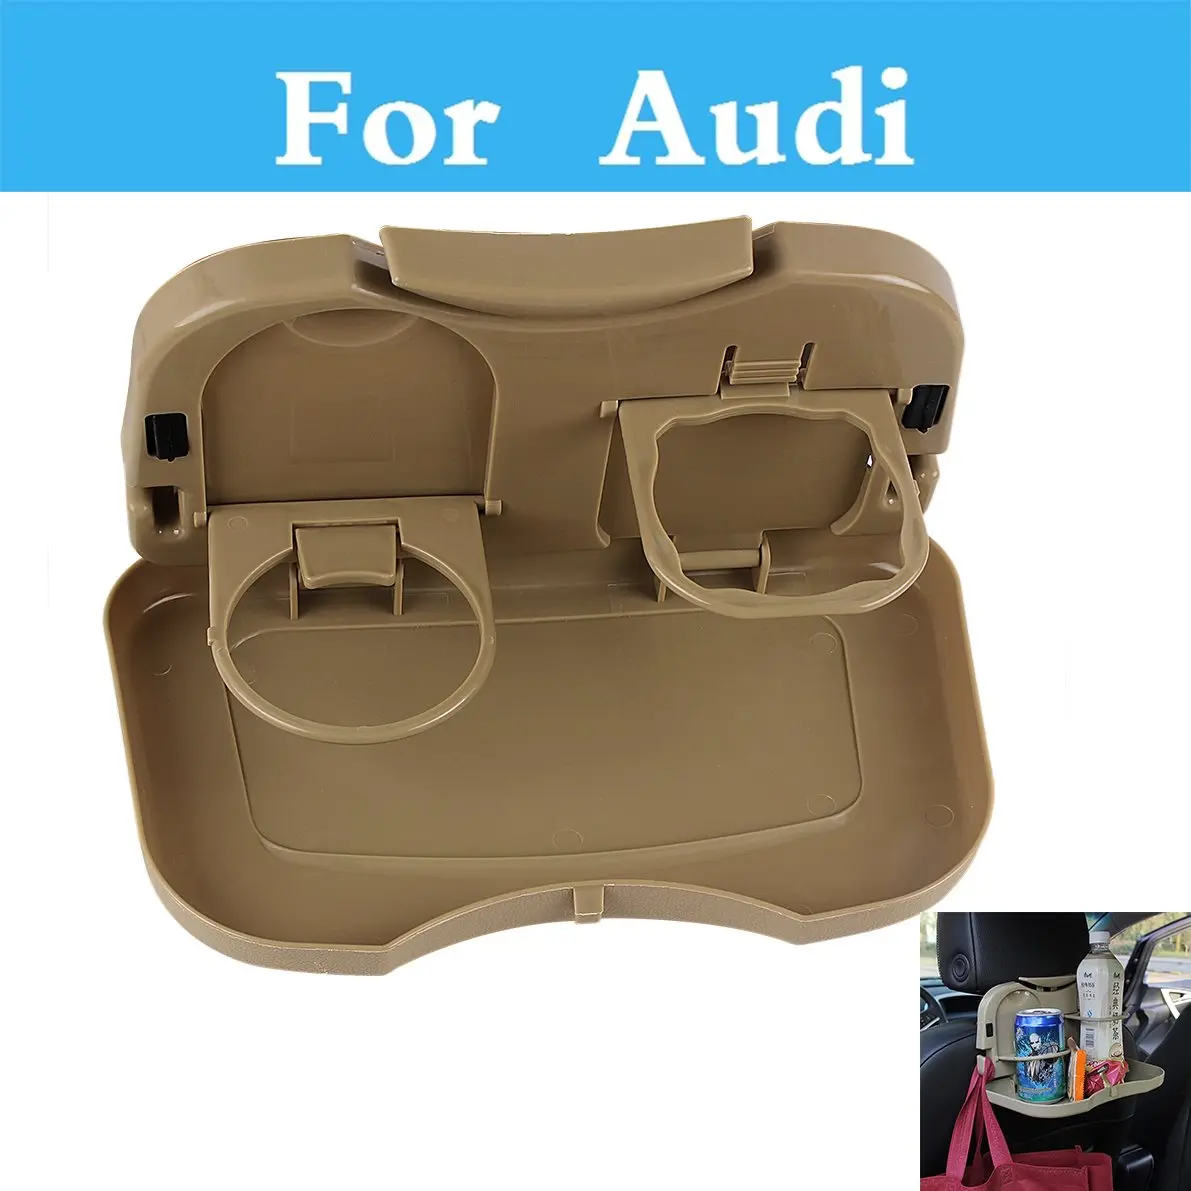 Auto Drinks Holders Multifunction Food Shelves Cup Holder Seat Back Organizer For Audi Q3 Q5 Q7 A3 A5 A4 A6 A7 A8 Auto Interior